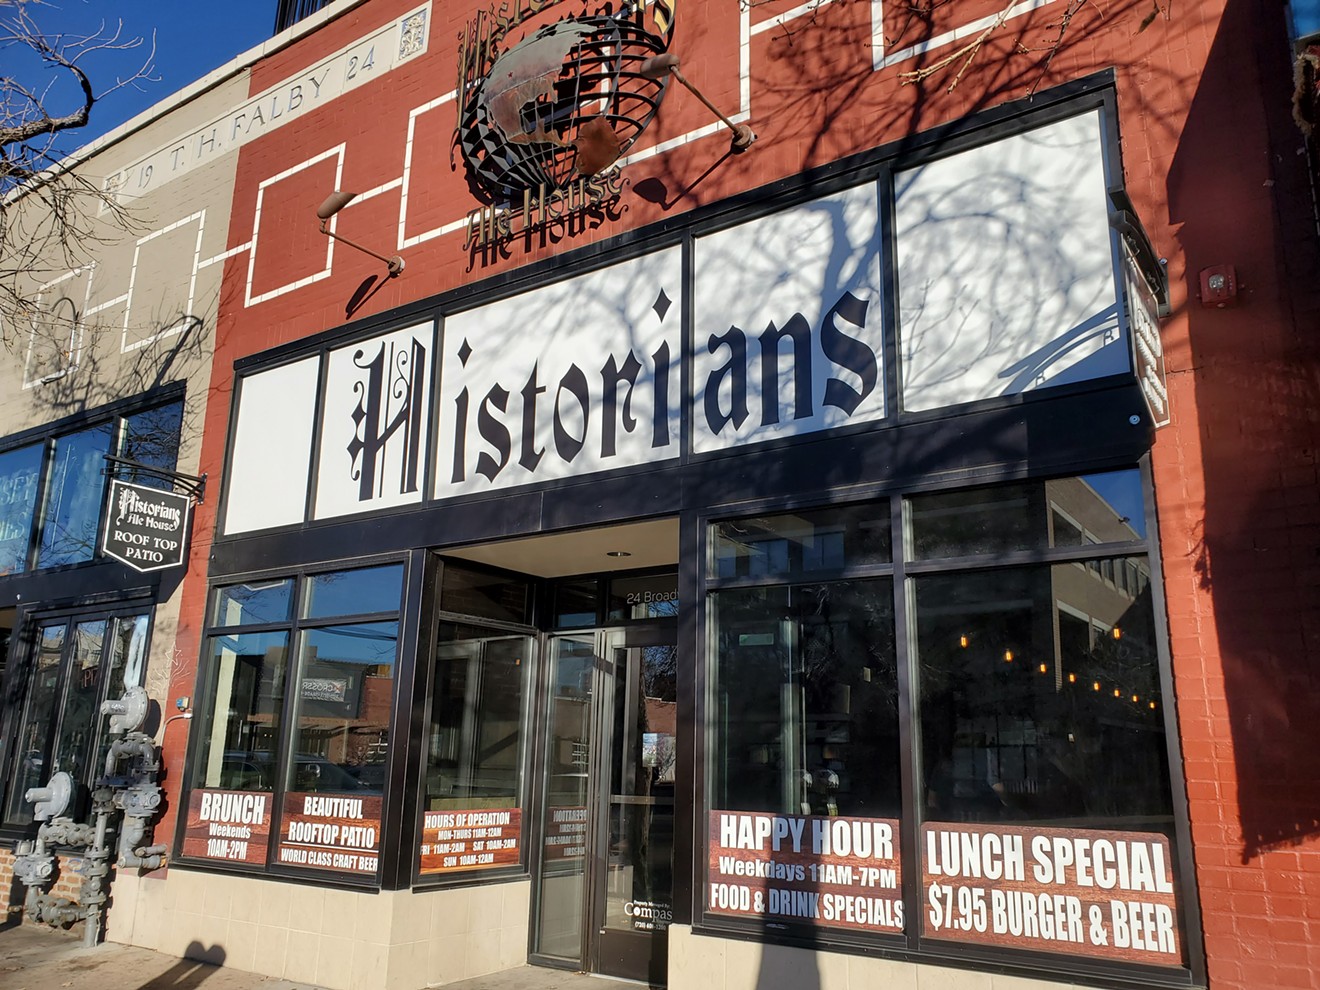 Historians Ale House is one place you can visit for drinks on December 25.